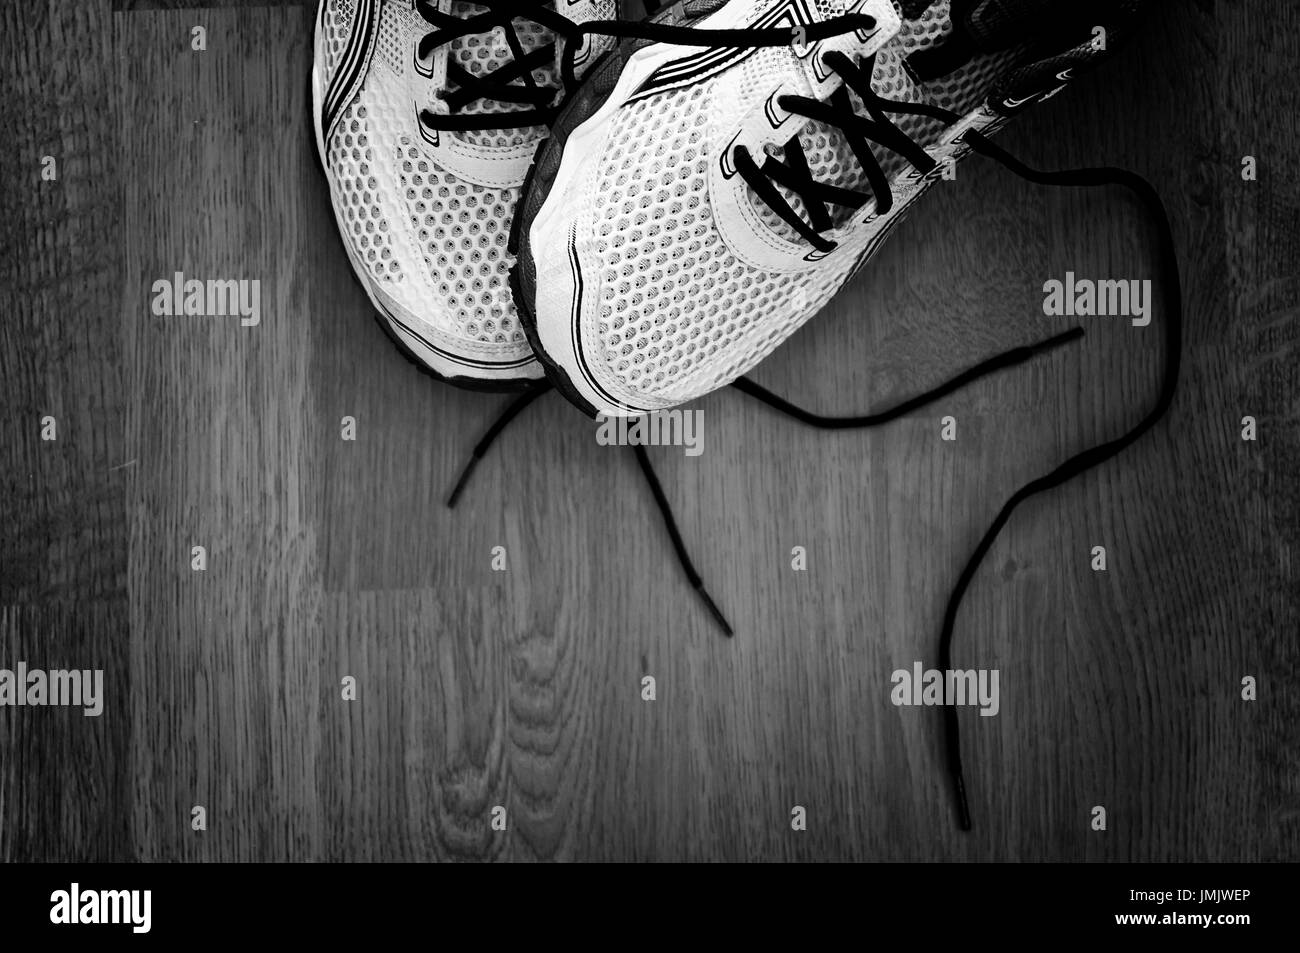 Detail photo of a pair of shoes. Black and white photo. Stock Photo